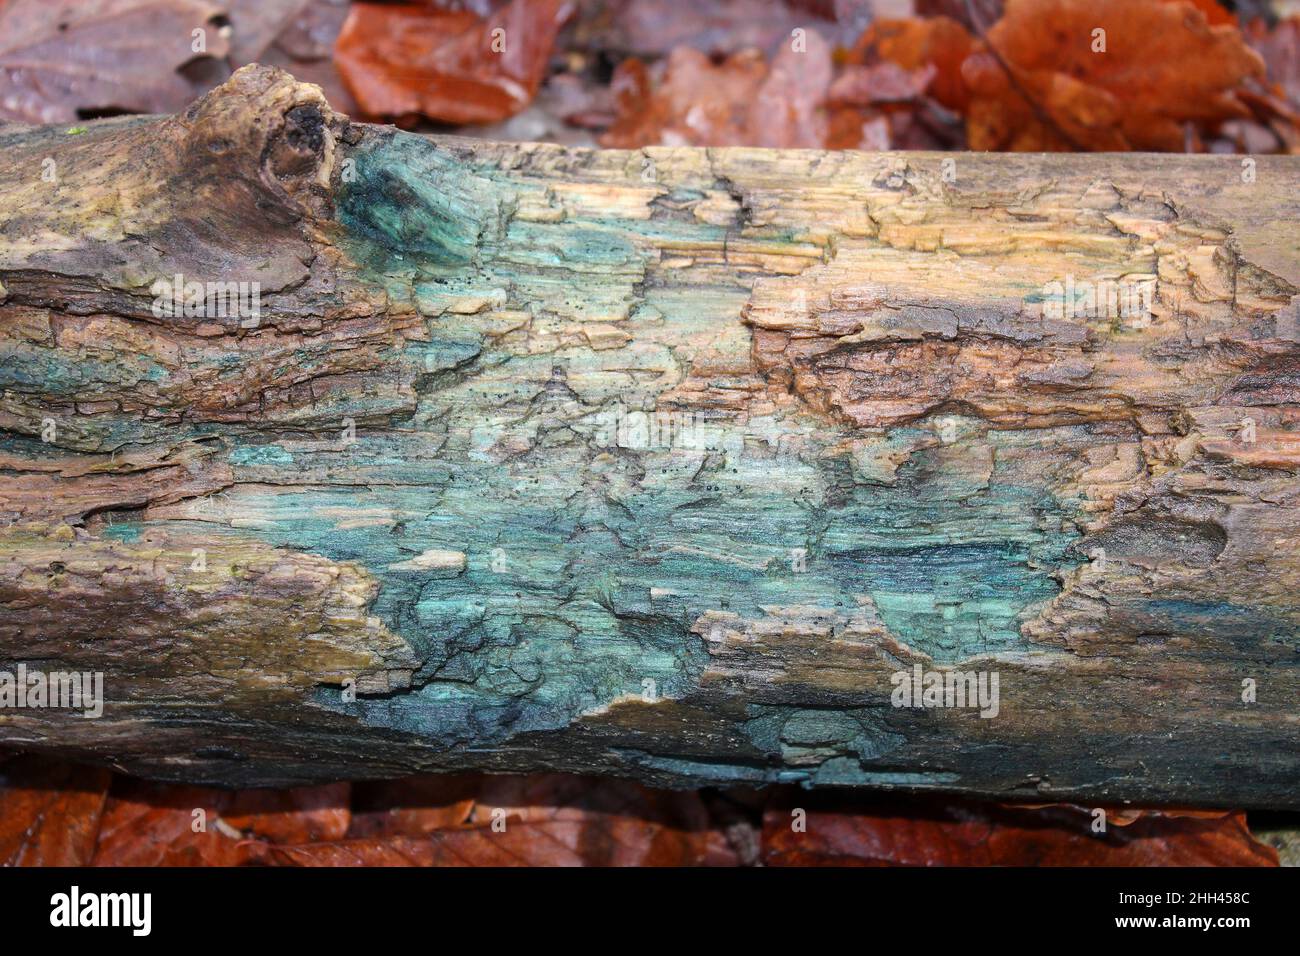 Green Staining Of Rotting Wood Associated With Green Elfcup Fungi Chlorociboria aeruginascens Stock Photo